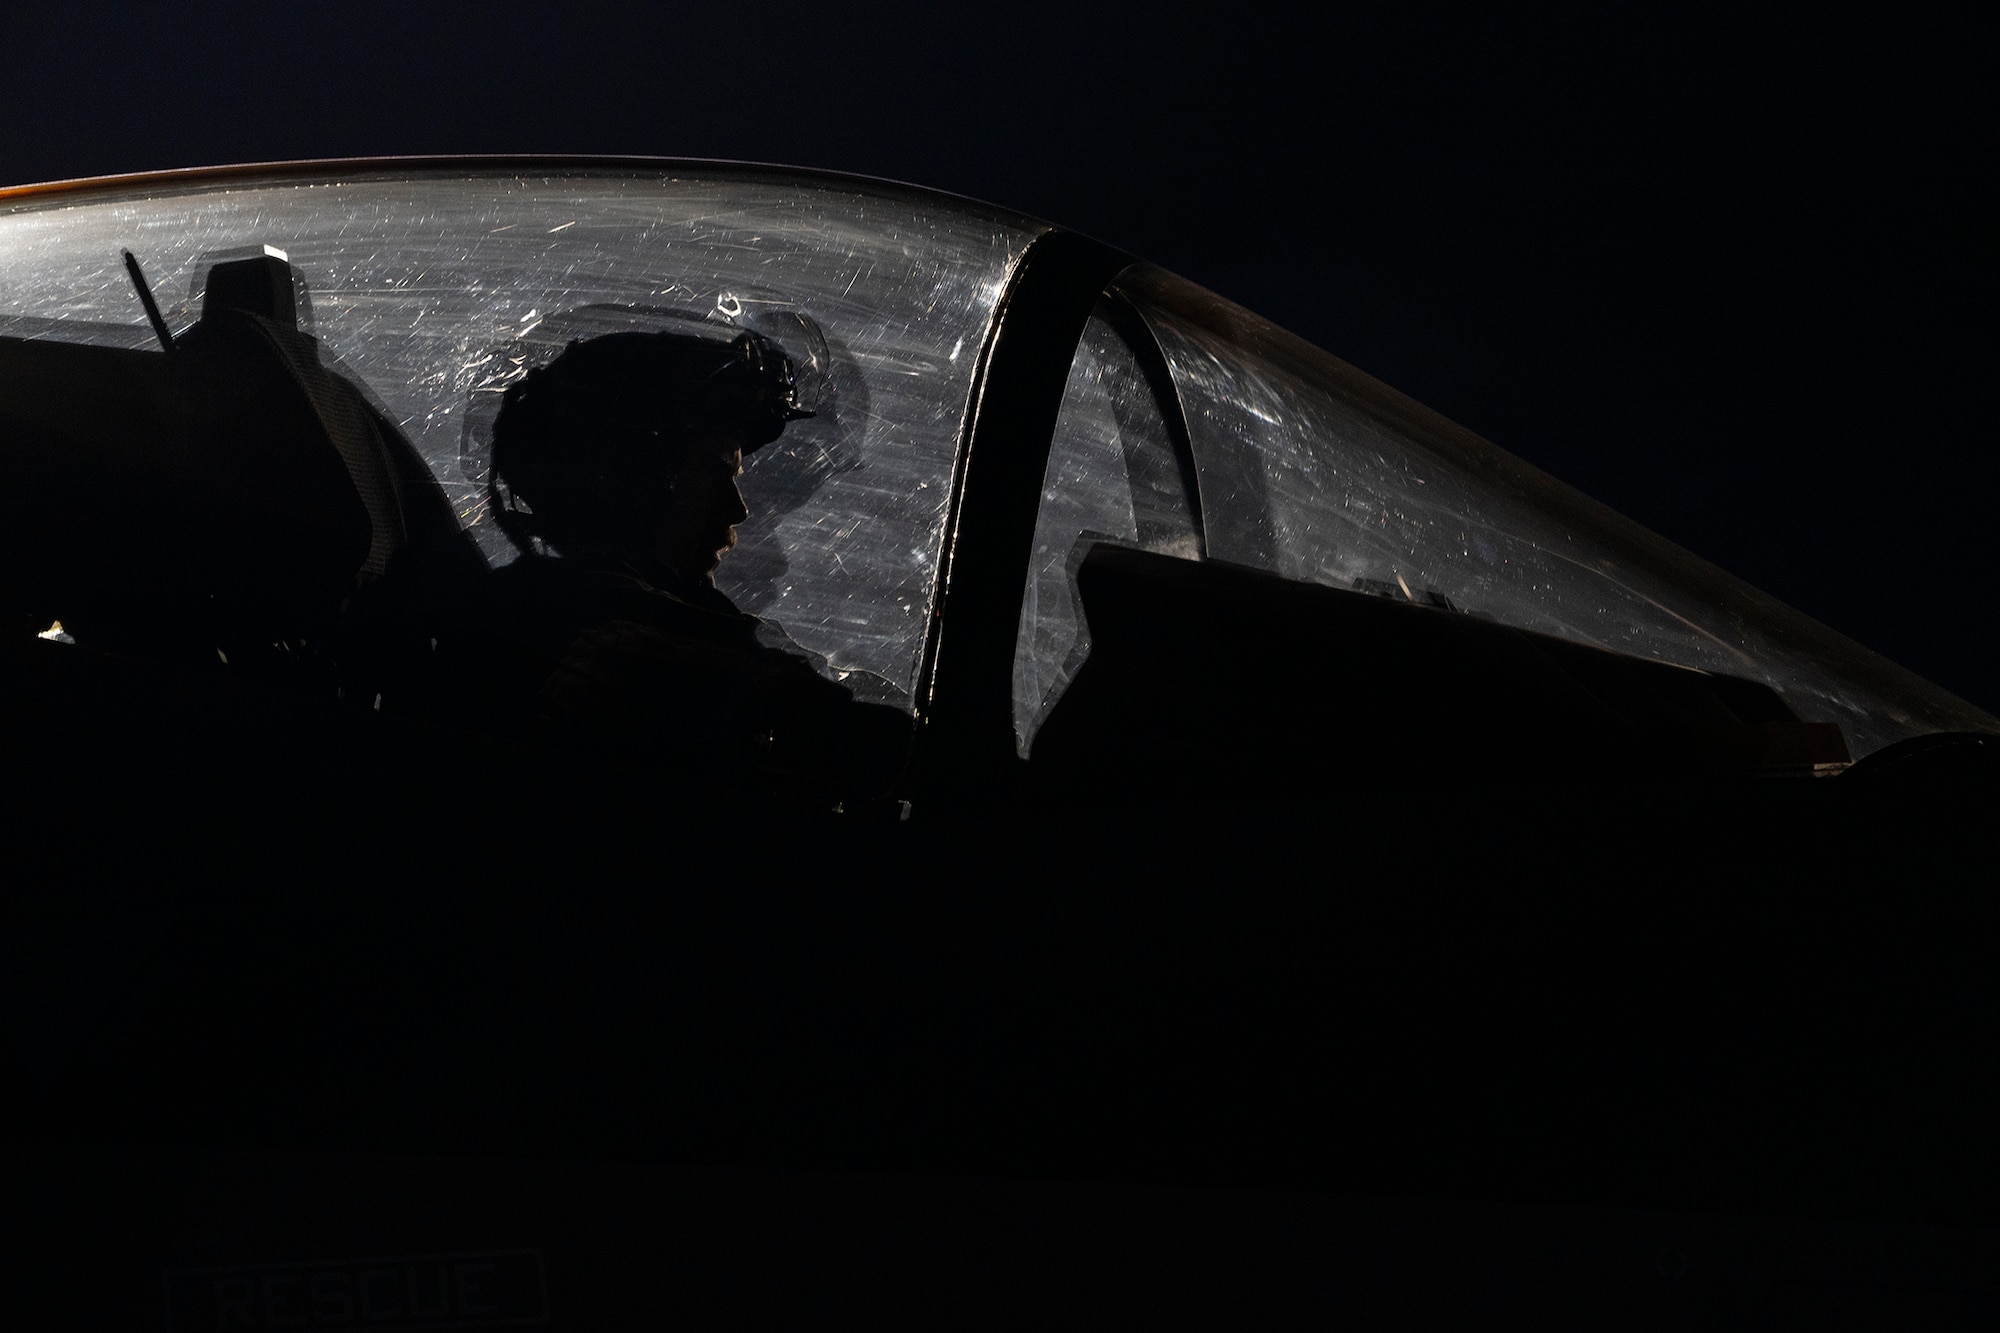 An F-35A Lightning II fighter jet pilot sits in the cockpit of an F-35A at night.